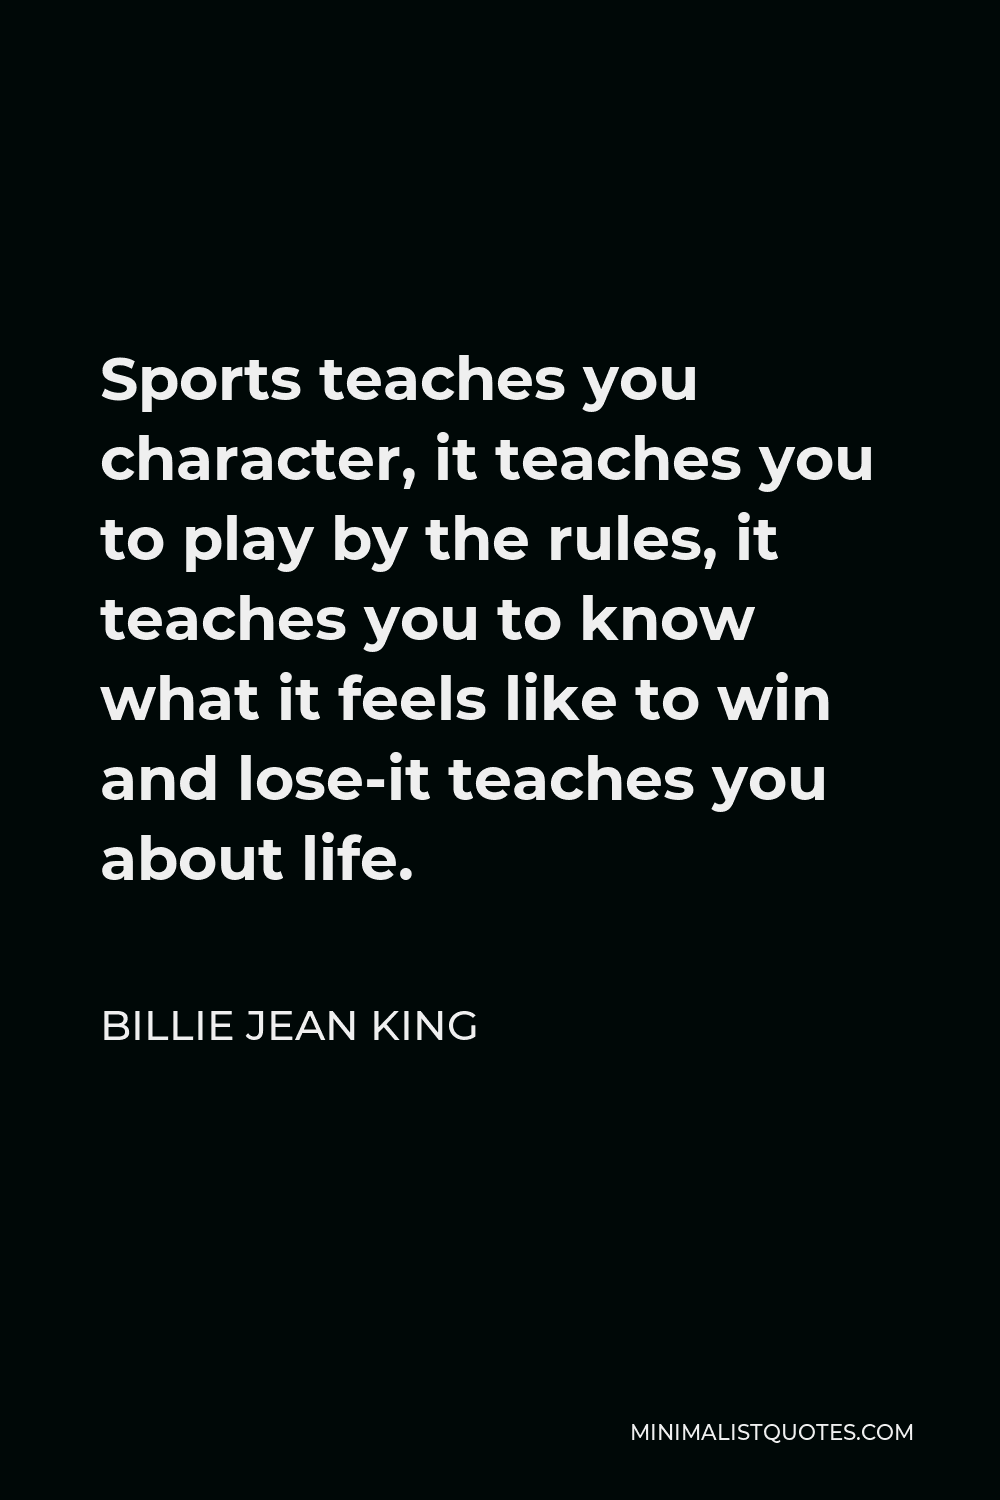 Billie Jean King Quote - Sports teaches you character, it teaches you to play by the rules, it teaches you to know what it feels like to win and lose-it teaches you about life.